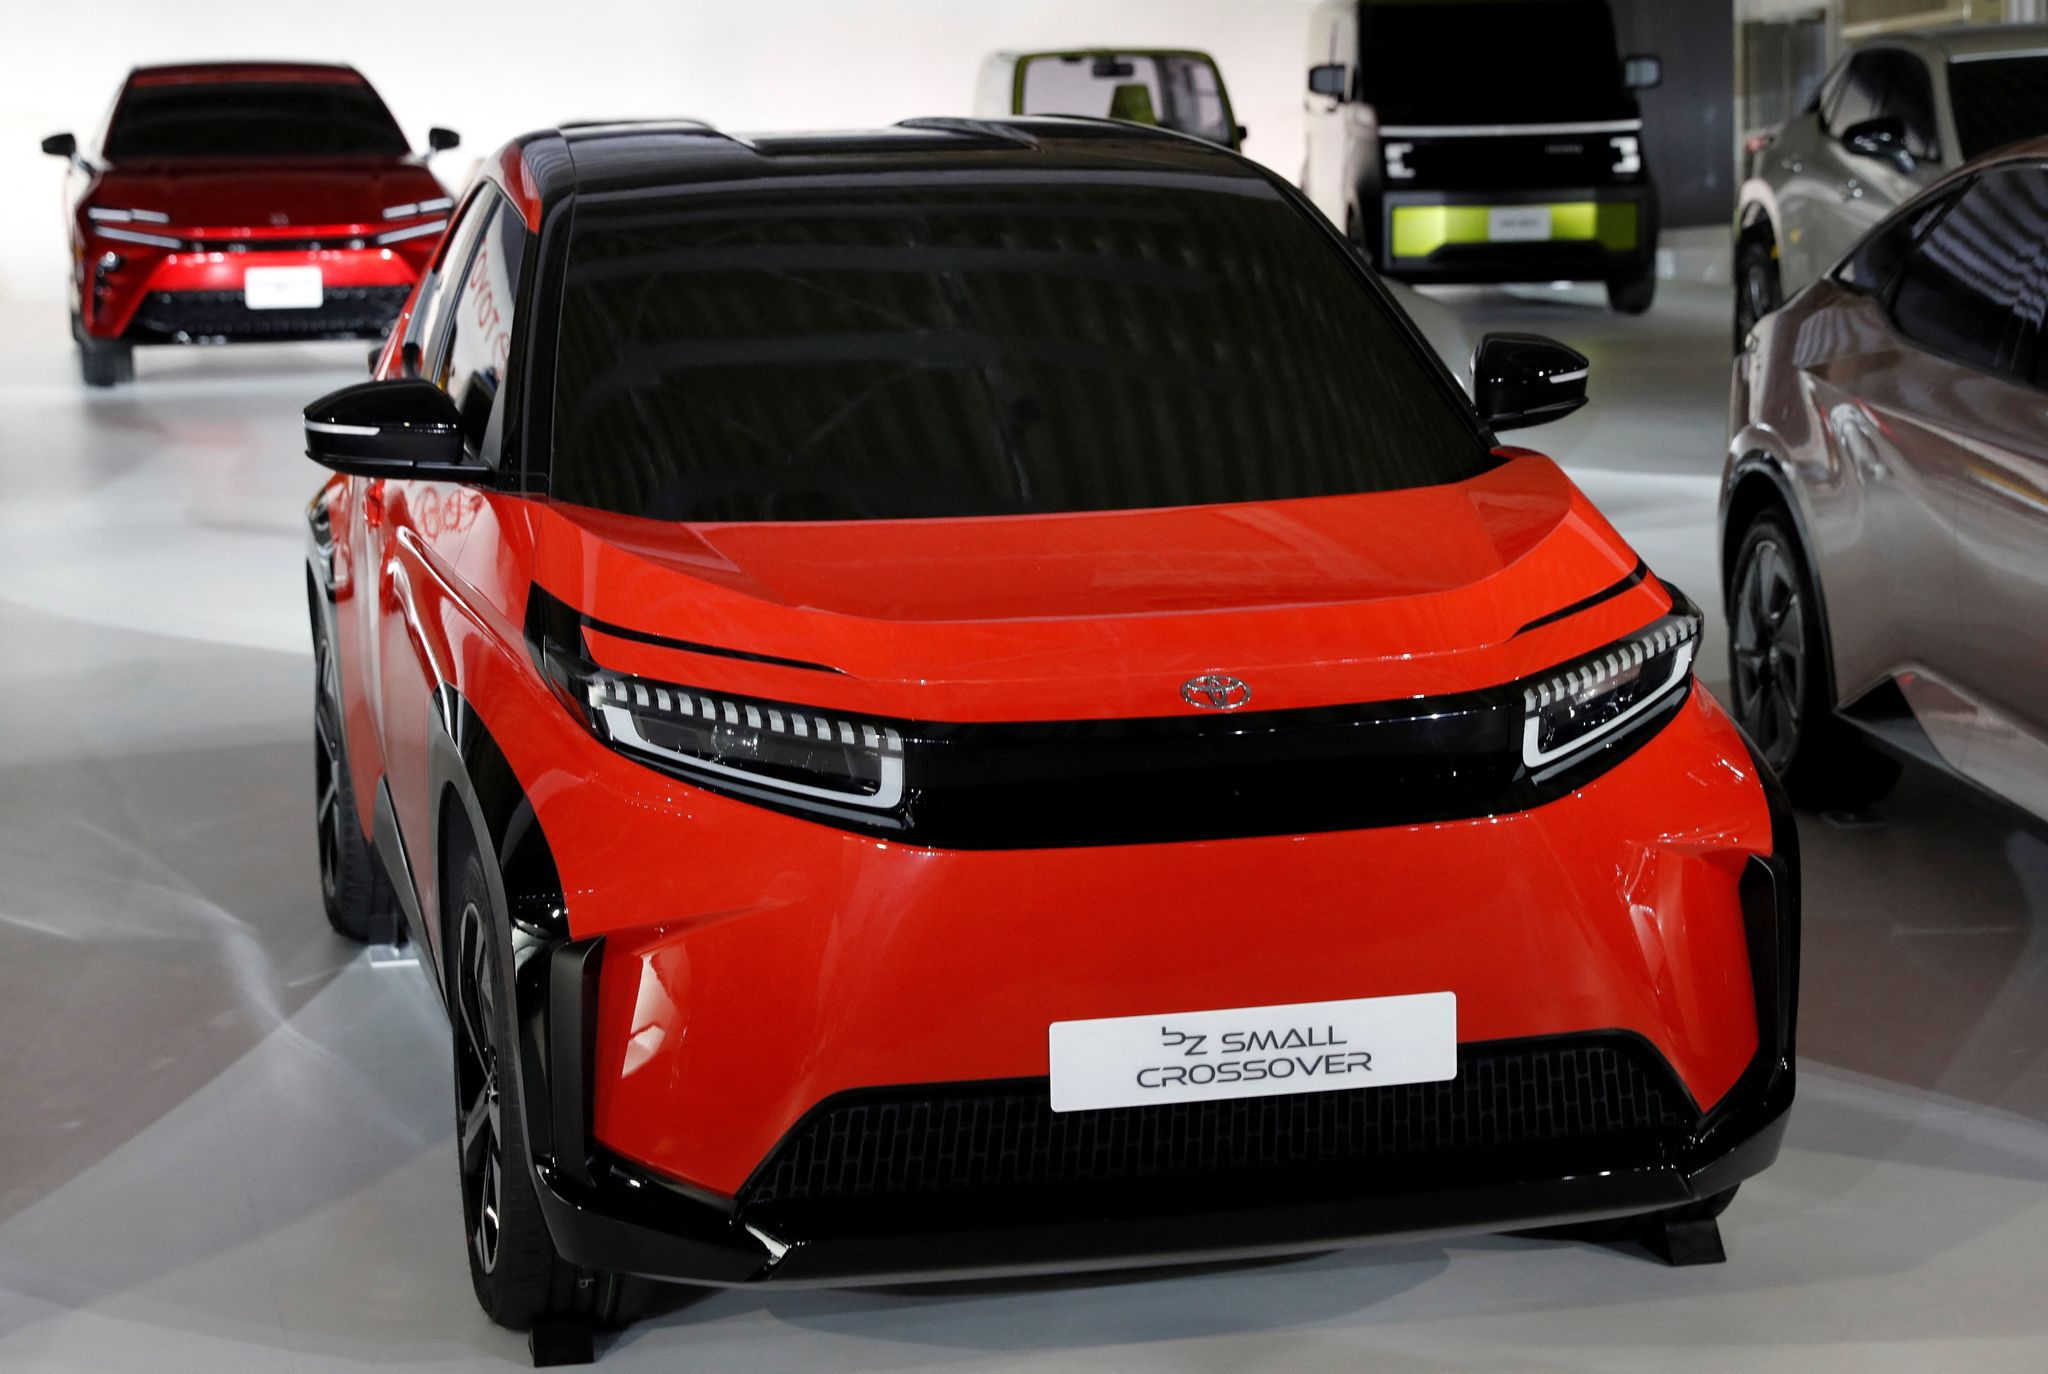 Toyota Motor Corporation's bZ Small Crossover is pictured after a briefing on the company's strategies on battery EVs in Tokyo, Japan December 14, 2021. Photo: Reuters